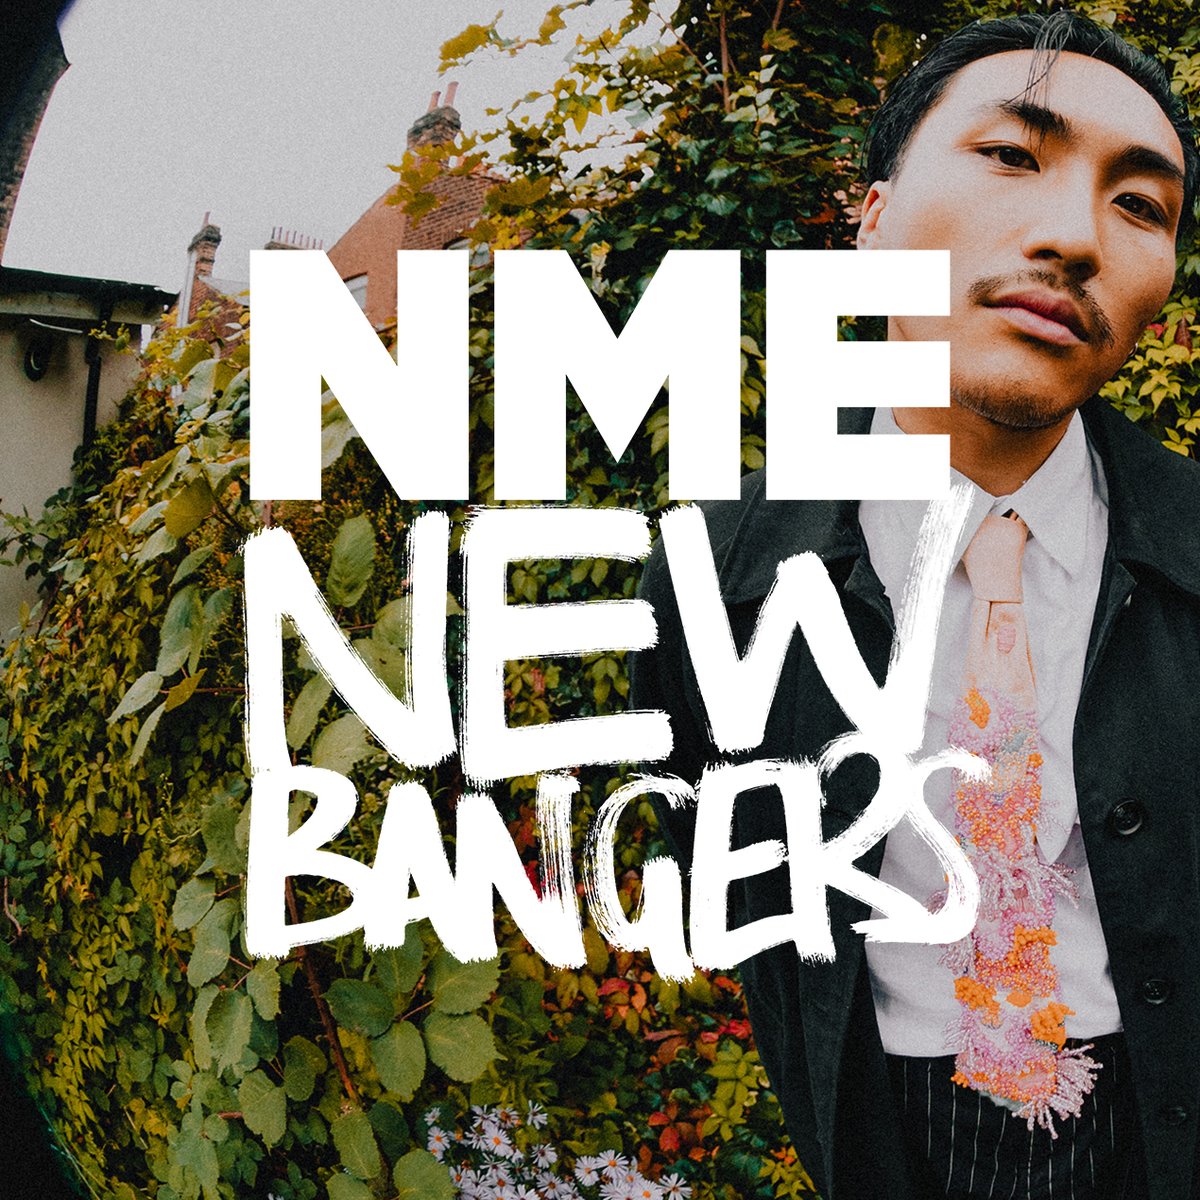 Listen and subscribe to NME's New Bangers each and every week, with huge new tunes from... @HongzaHongza @dustband_ @GELhc @YnysMusic @imlianaflores @catburns & more! Spotify: open.spotify.com/playlist/0xXZW… Apple Music: music.apple.com/us/playlist/nm…